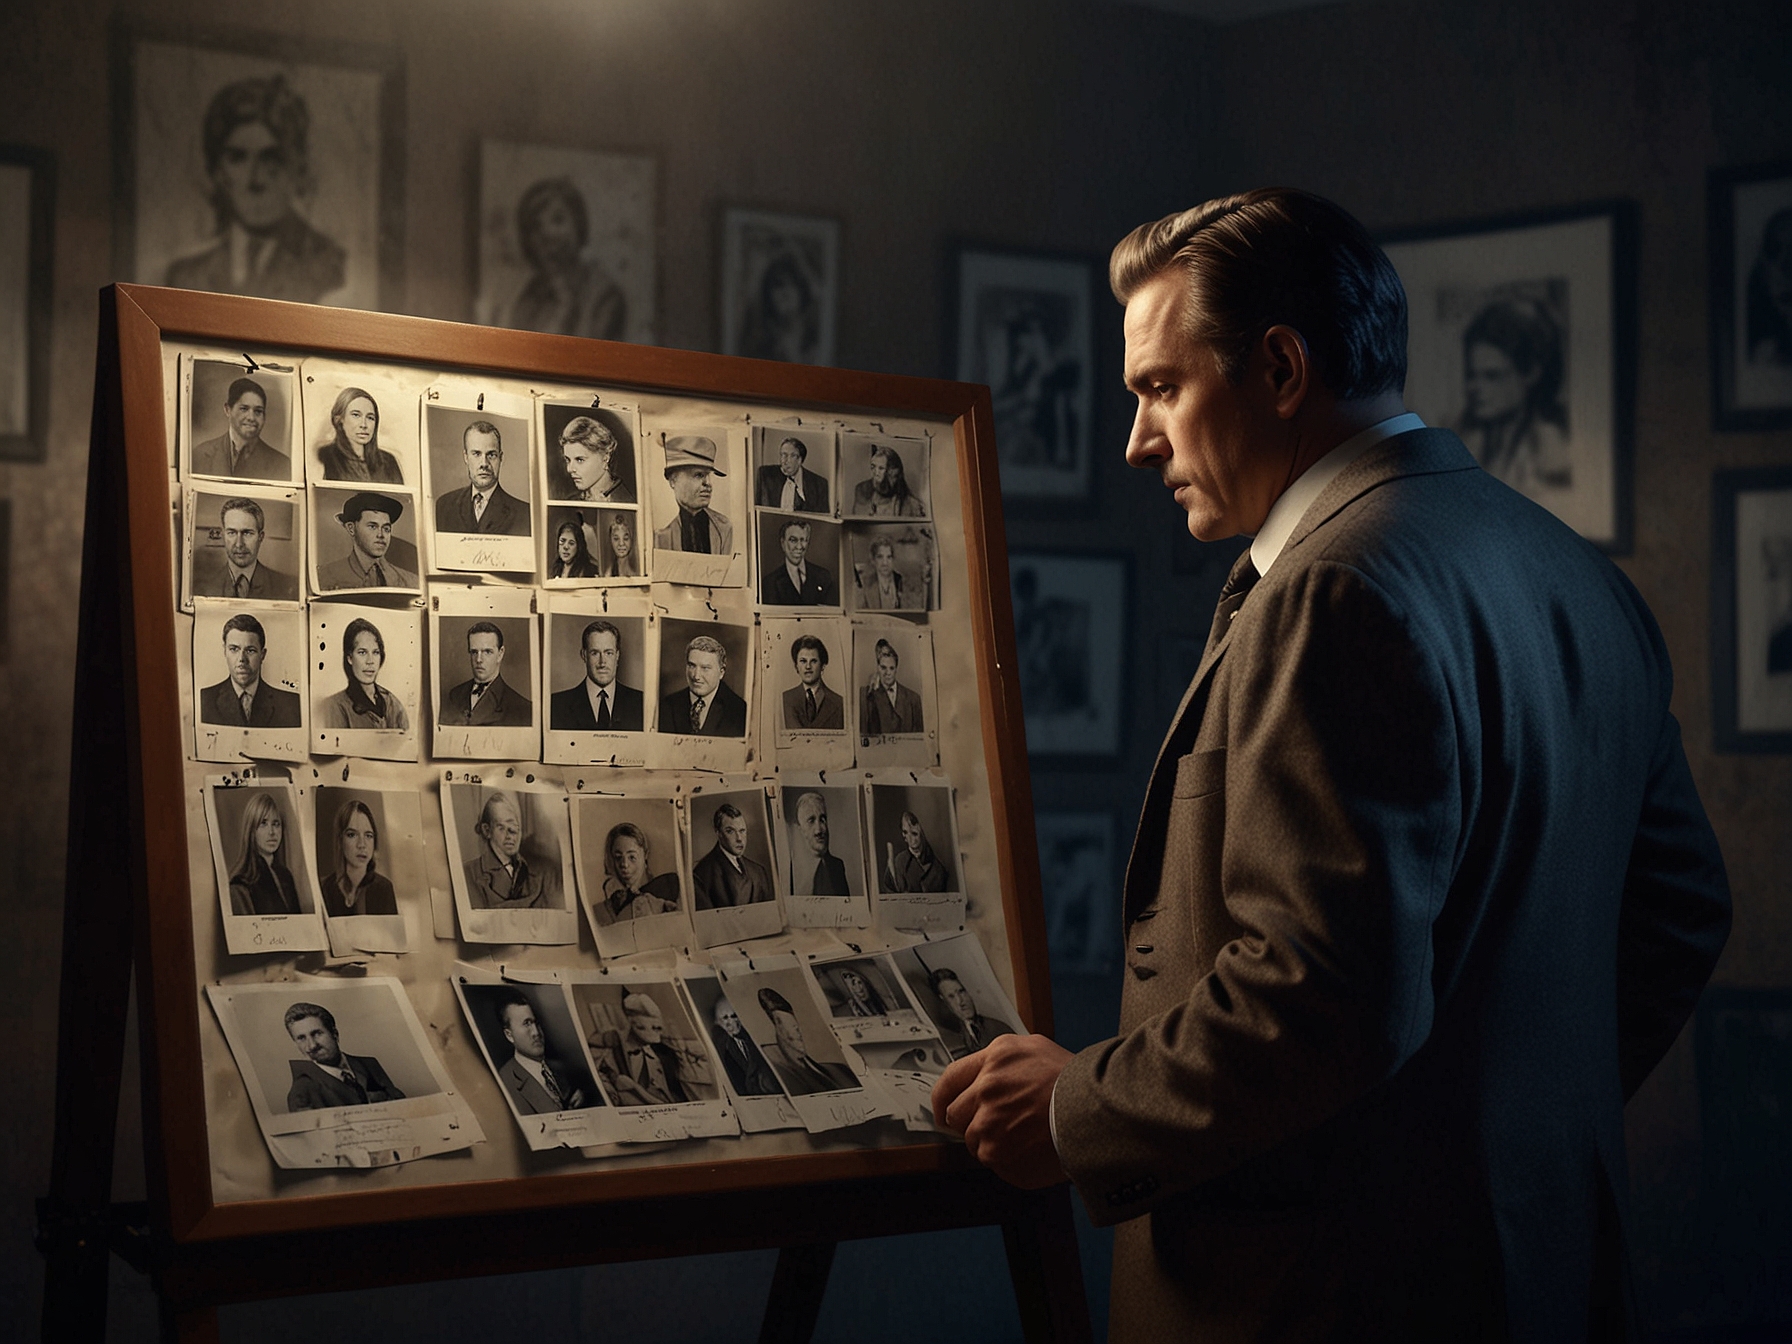 An image of a private detective looking at a pin board filled with clues and photographs, representing the intriguing investigation into the Hollywood producer's granddaughter's disappearance.